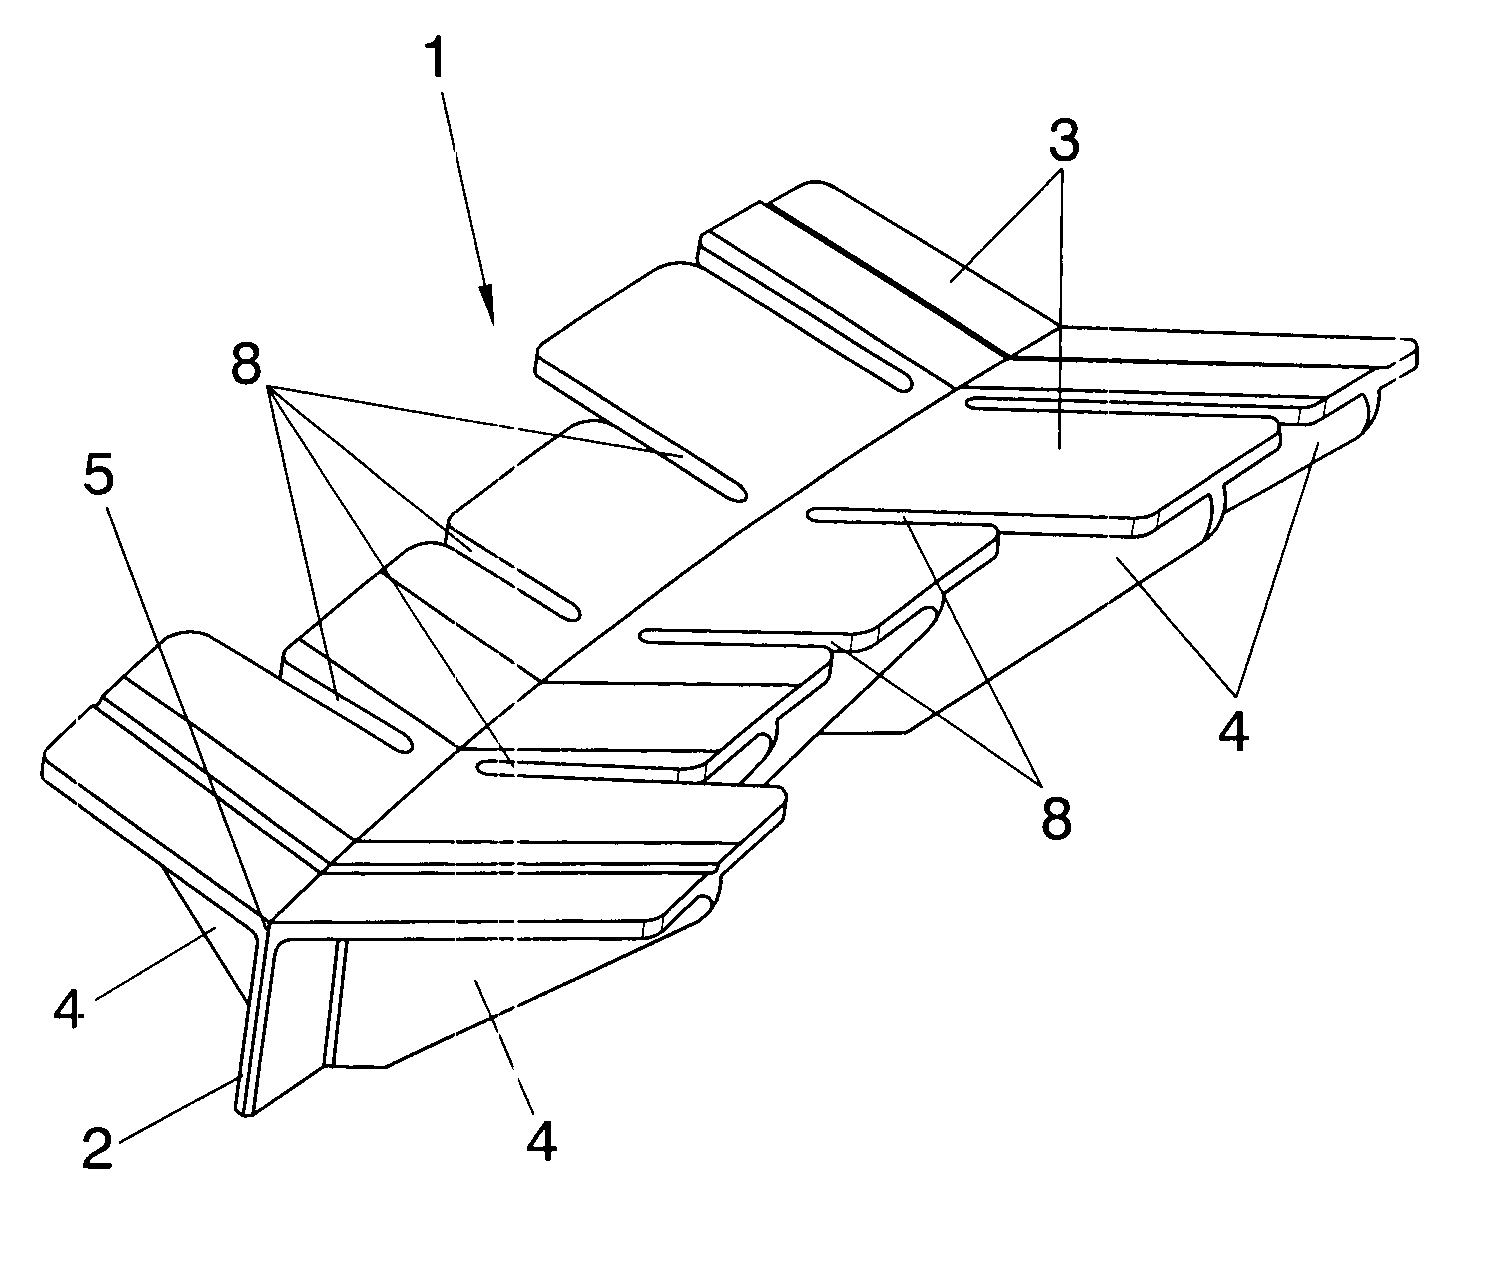 Structure for joining torsion boxes in an aircraft using a triform fitting made from non-metallic composite materials